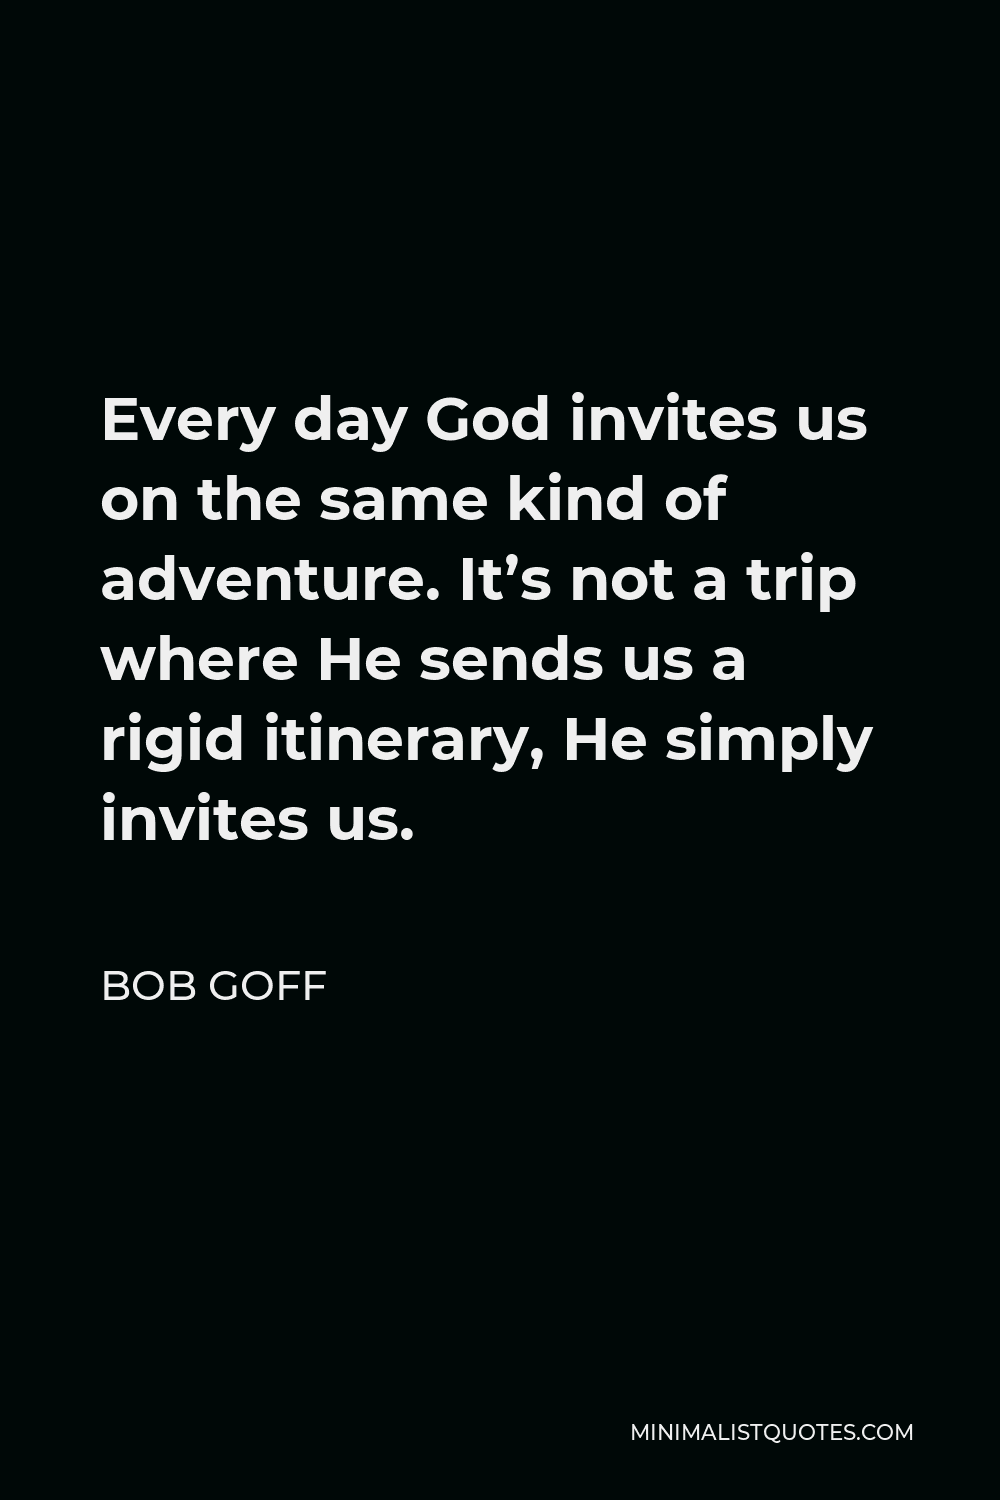 Bob Goff Quote - Every day God invites us on the same kind of adventure. It’s not a trip where He sends us a rigid itinerary, He simply invites us.